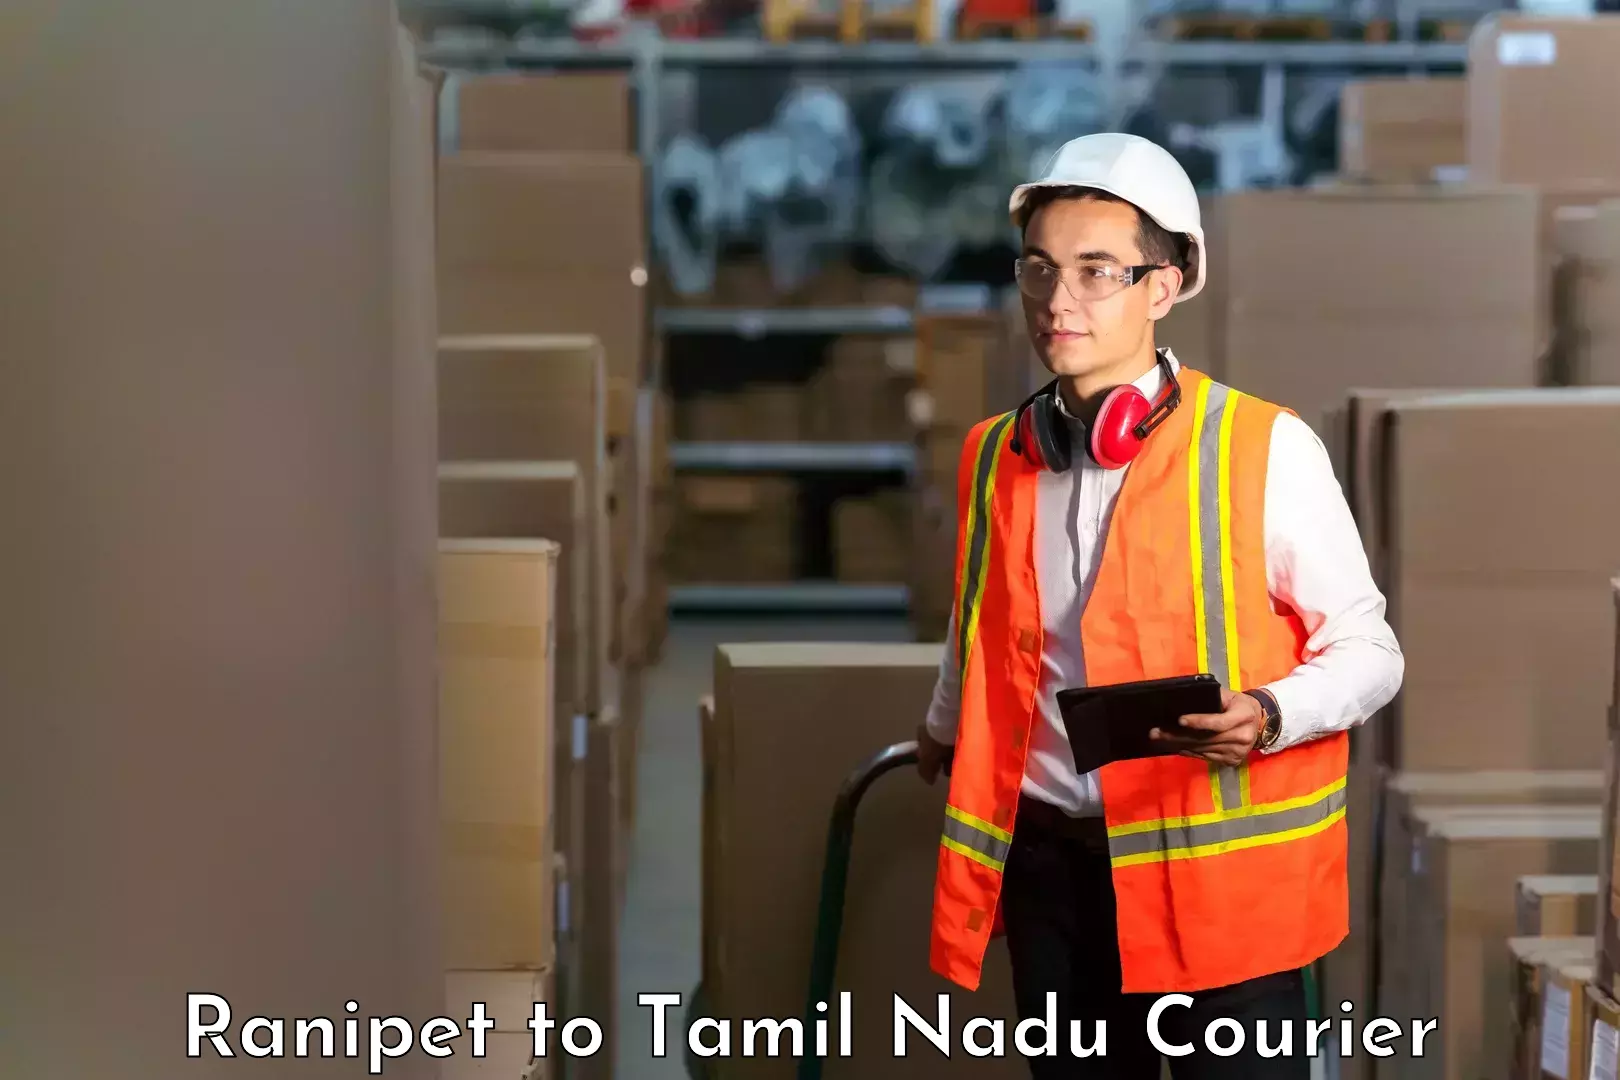 Reliable parcel services Ranipet to Coimbatore